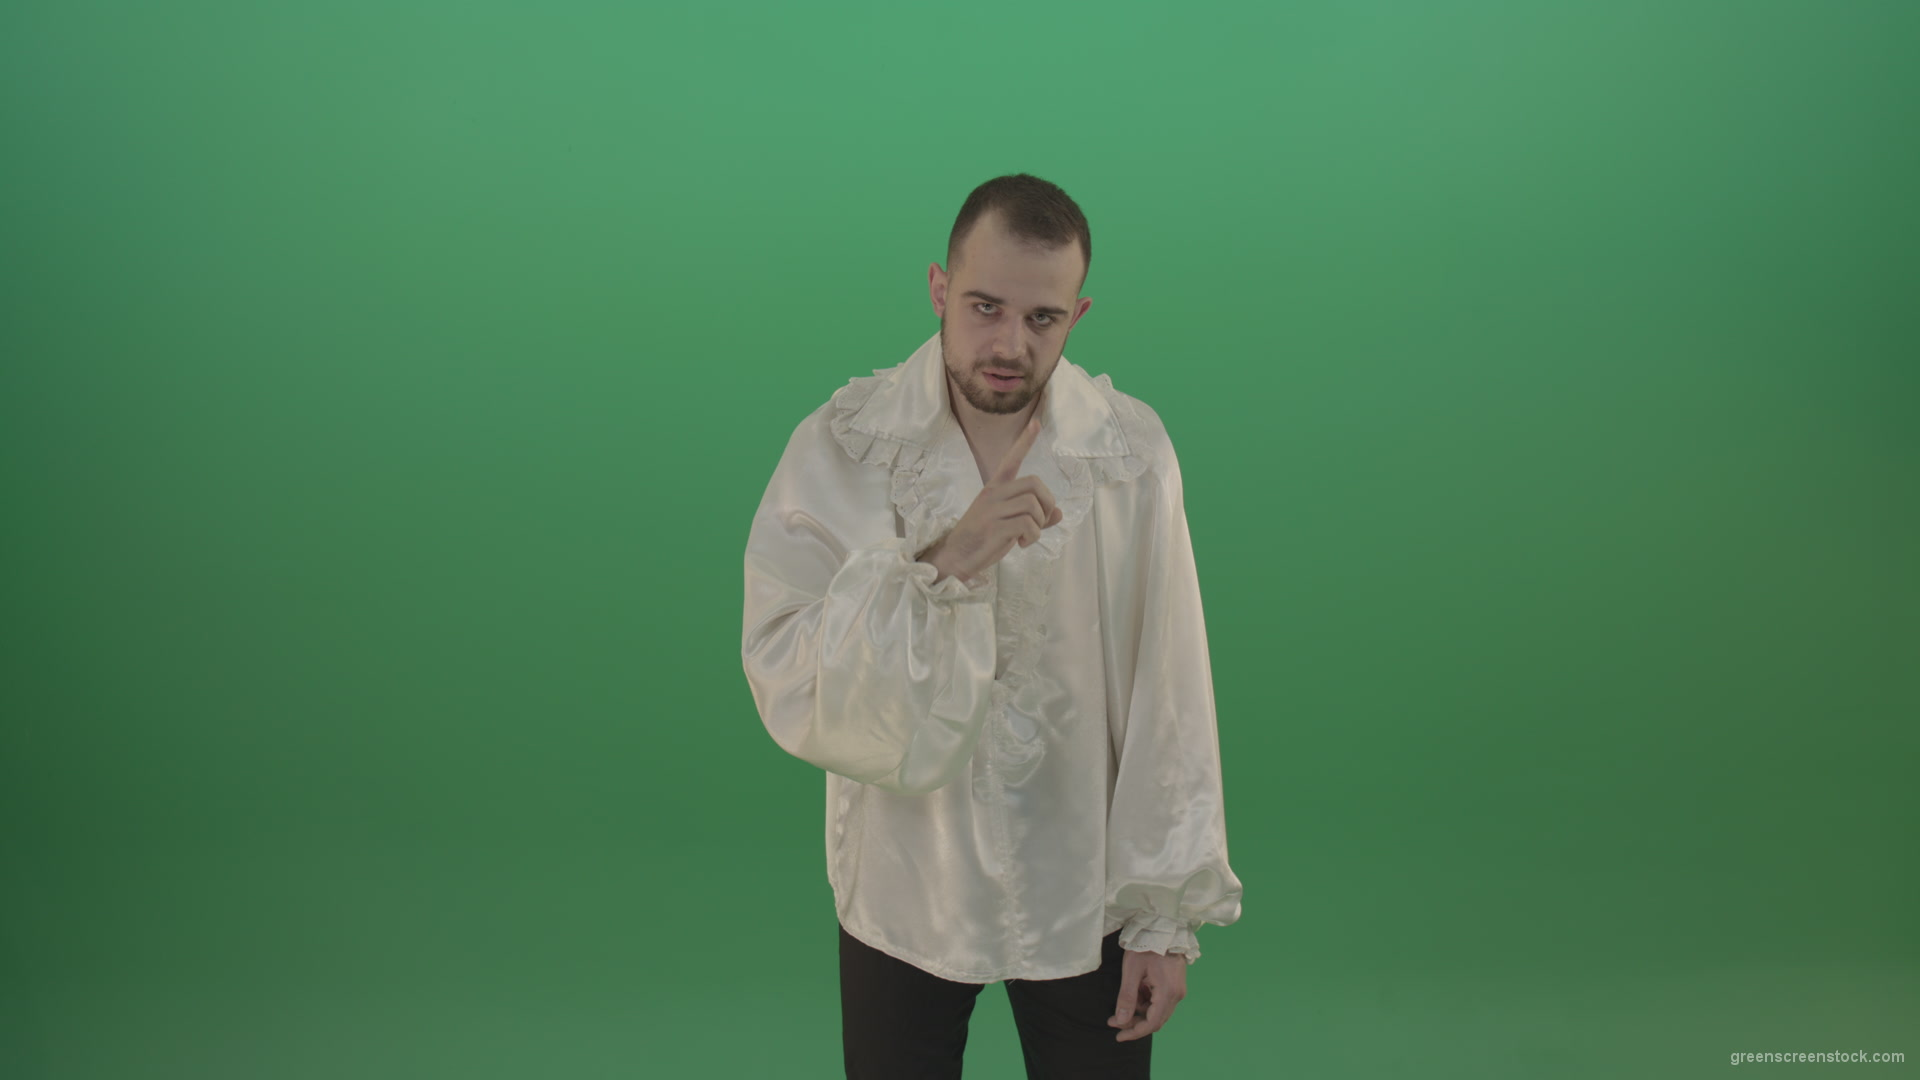 Maniac-man-was-very-angry-asking-for-silence-showing-sign-isolated-in-green-screen-studio_008 Green Screen Stock